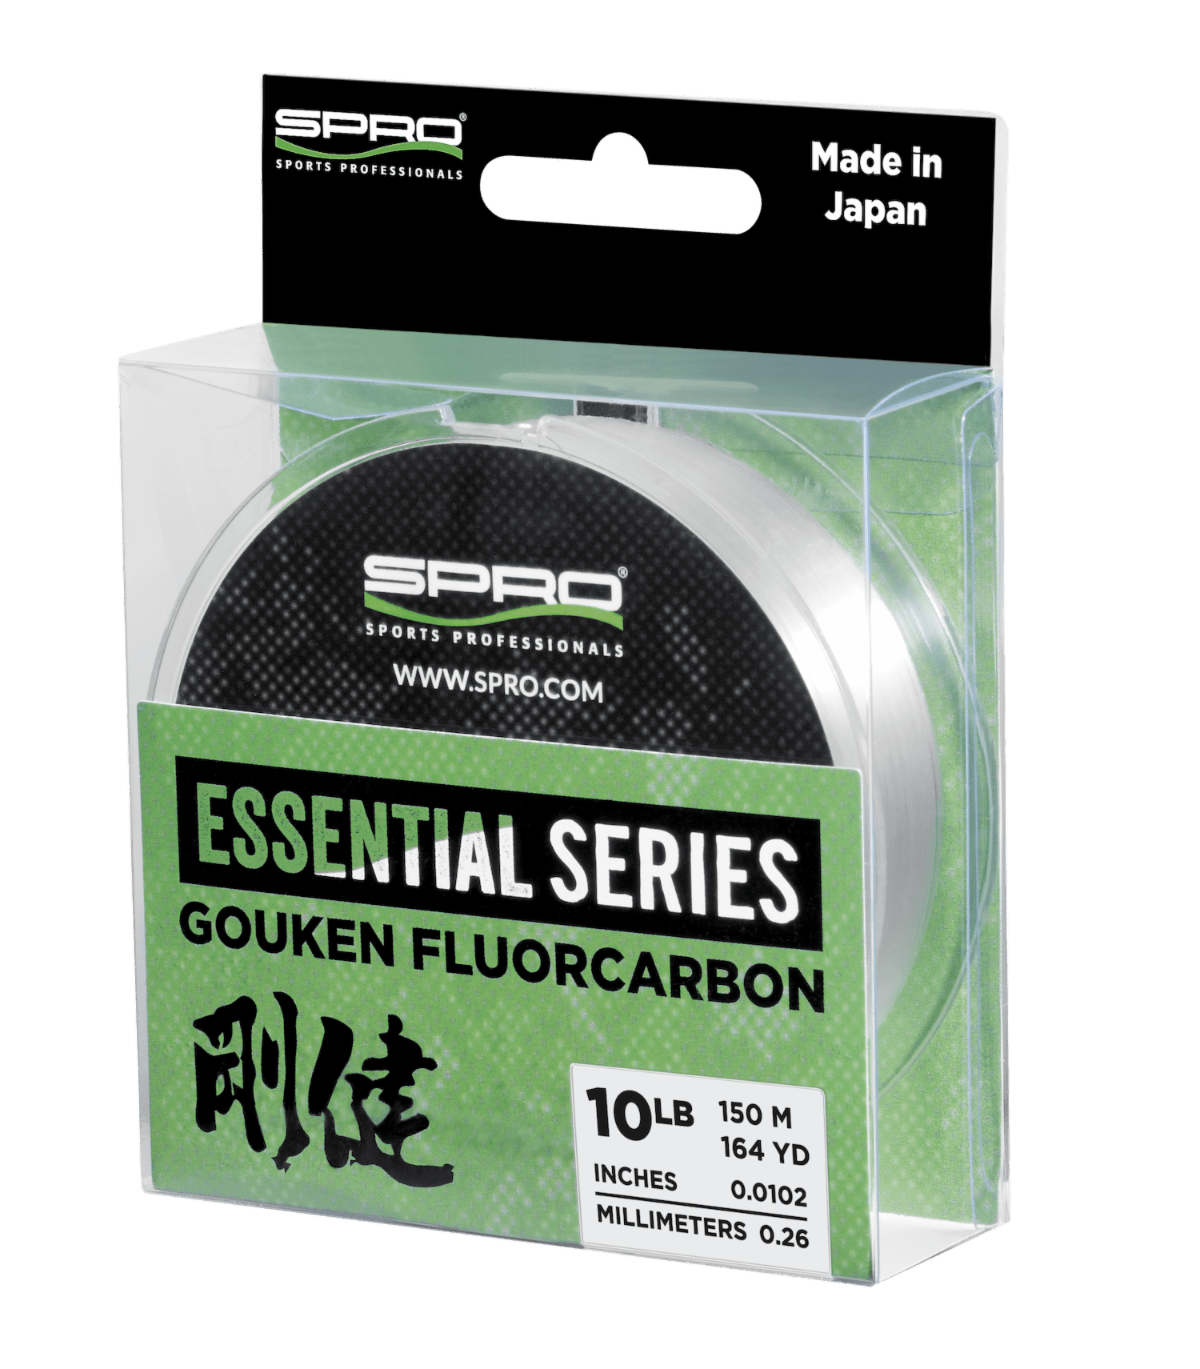 NEW for 2021: SPRO Fluorocarbon Gouken Line is Tough as Nails